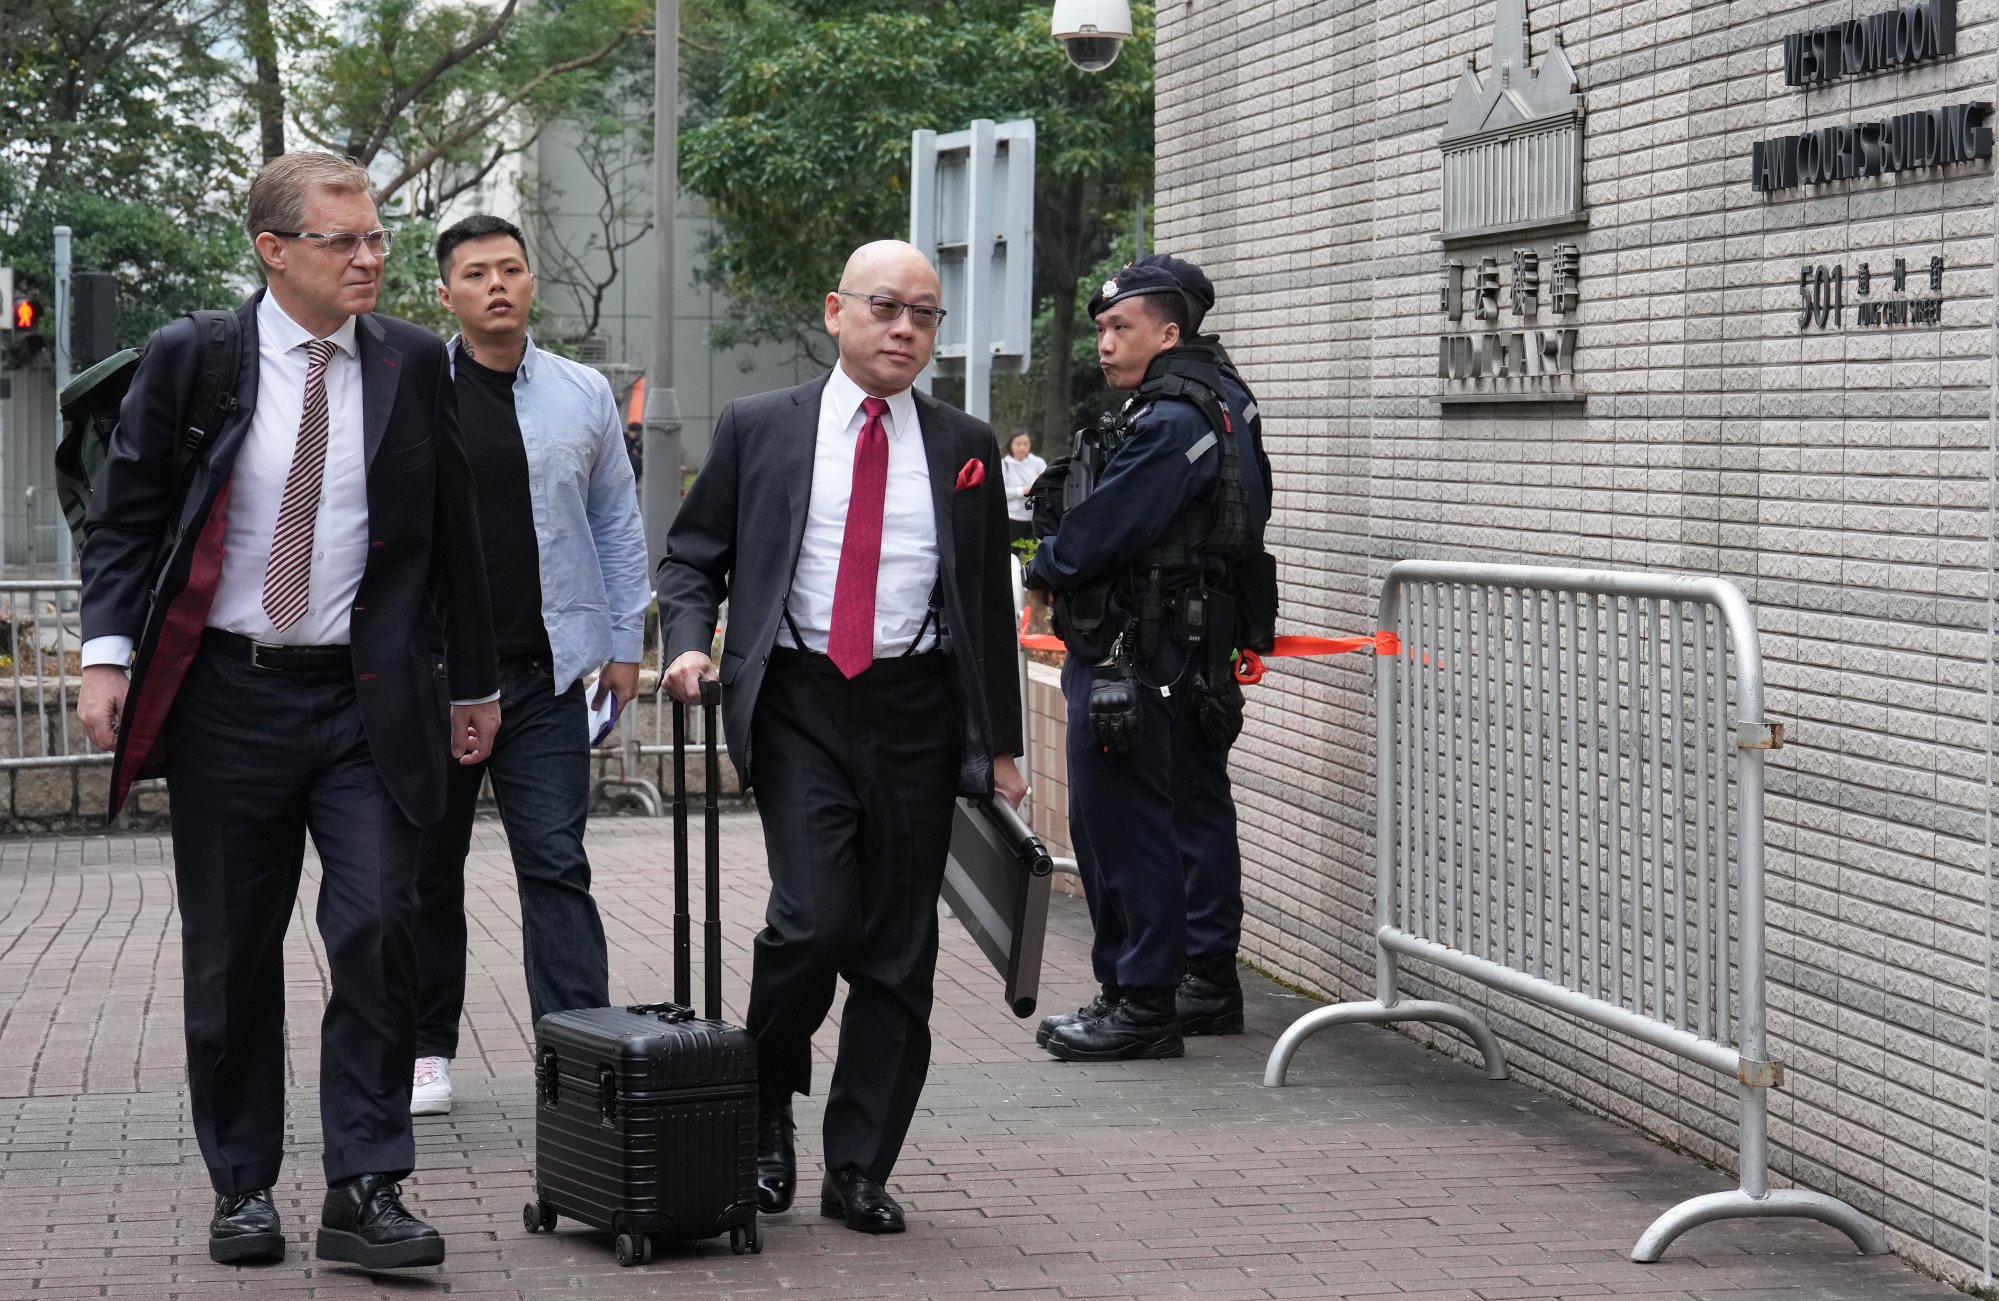 hong kong tycoon jimmy lai called on us to impose ‘very draconian’ sanctions against beijing, court hears in mogul’s past interviews